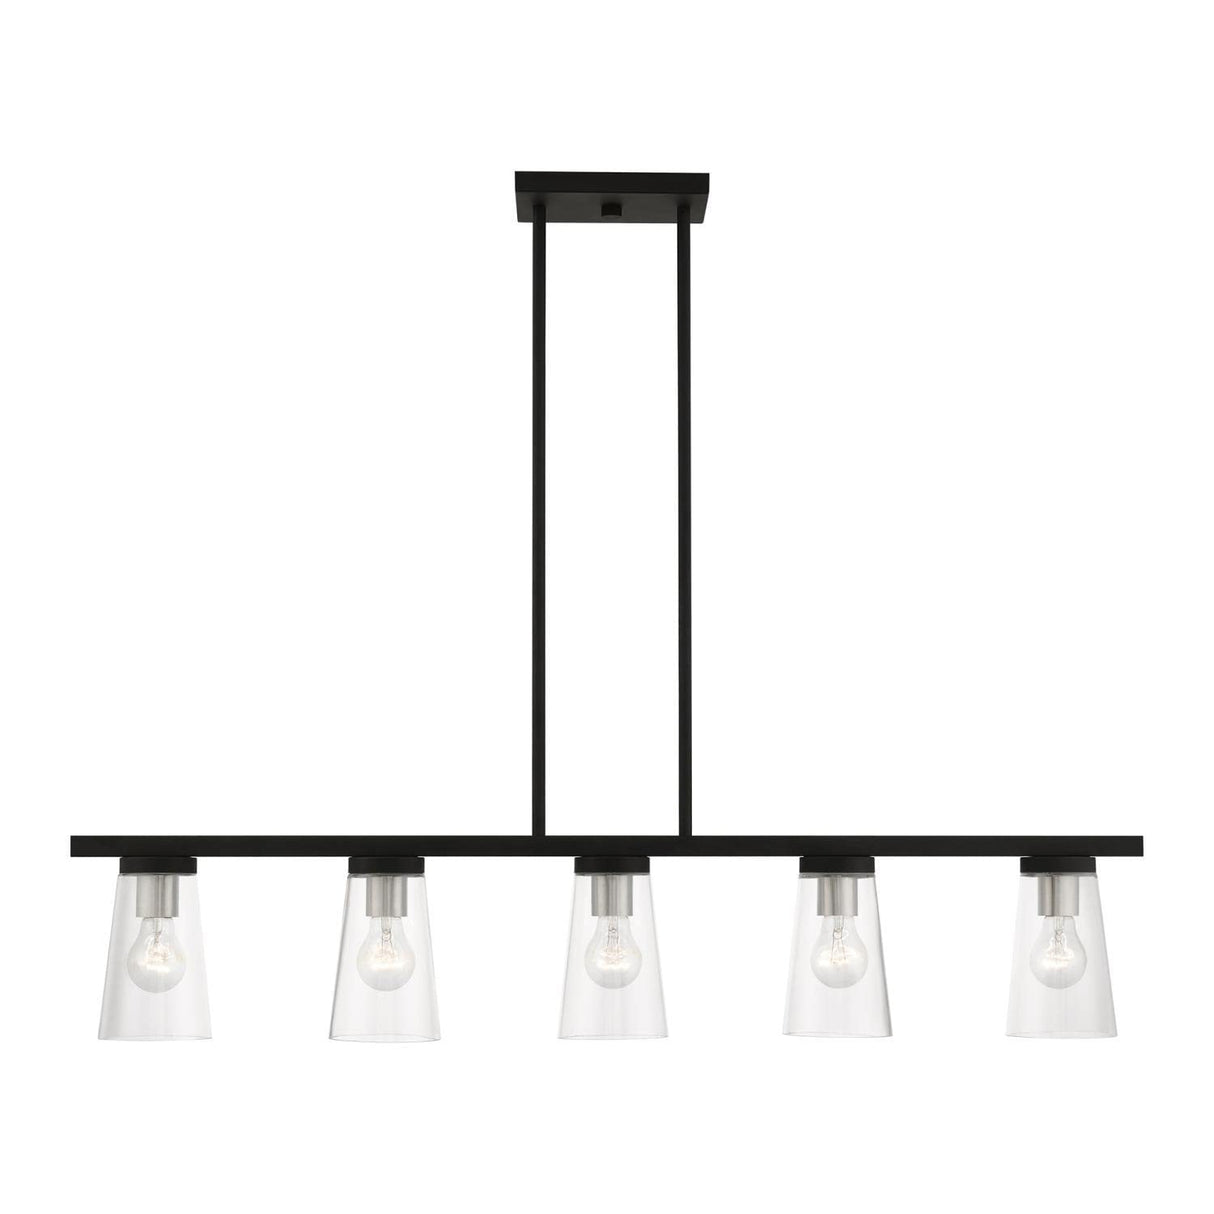 Cityview 5 Light Linear Chandelier in Black with Brushed Nickel (46715-04)